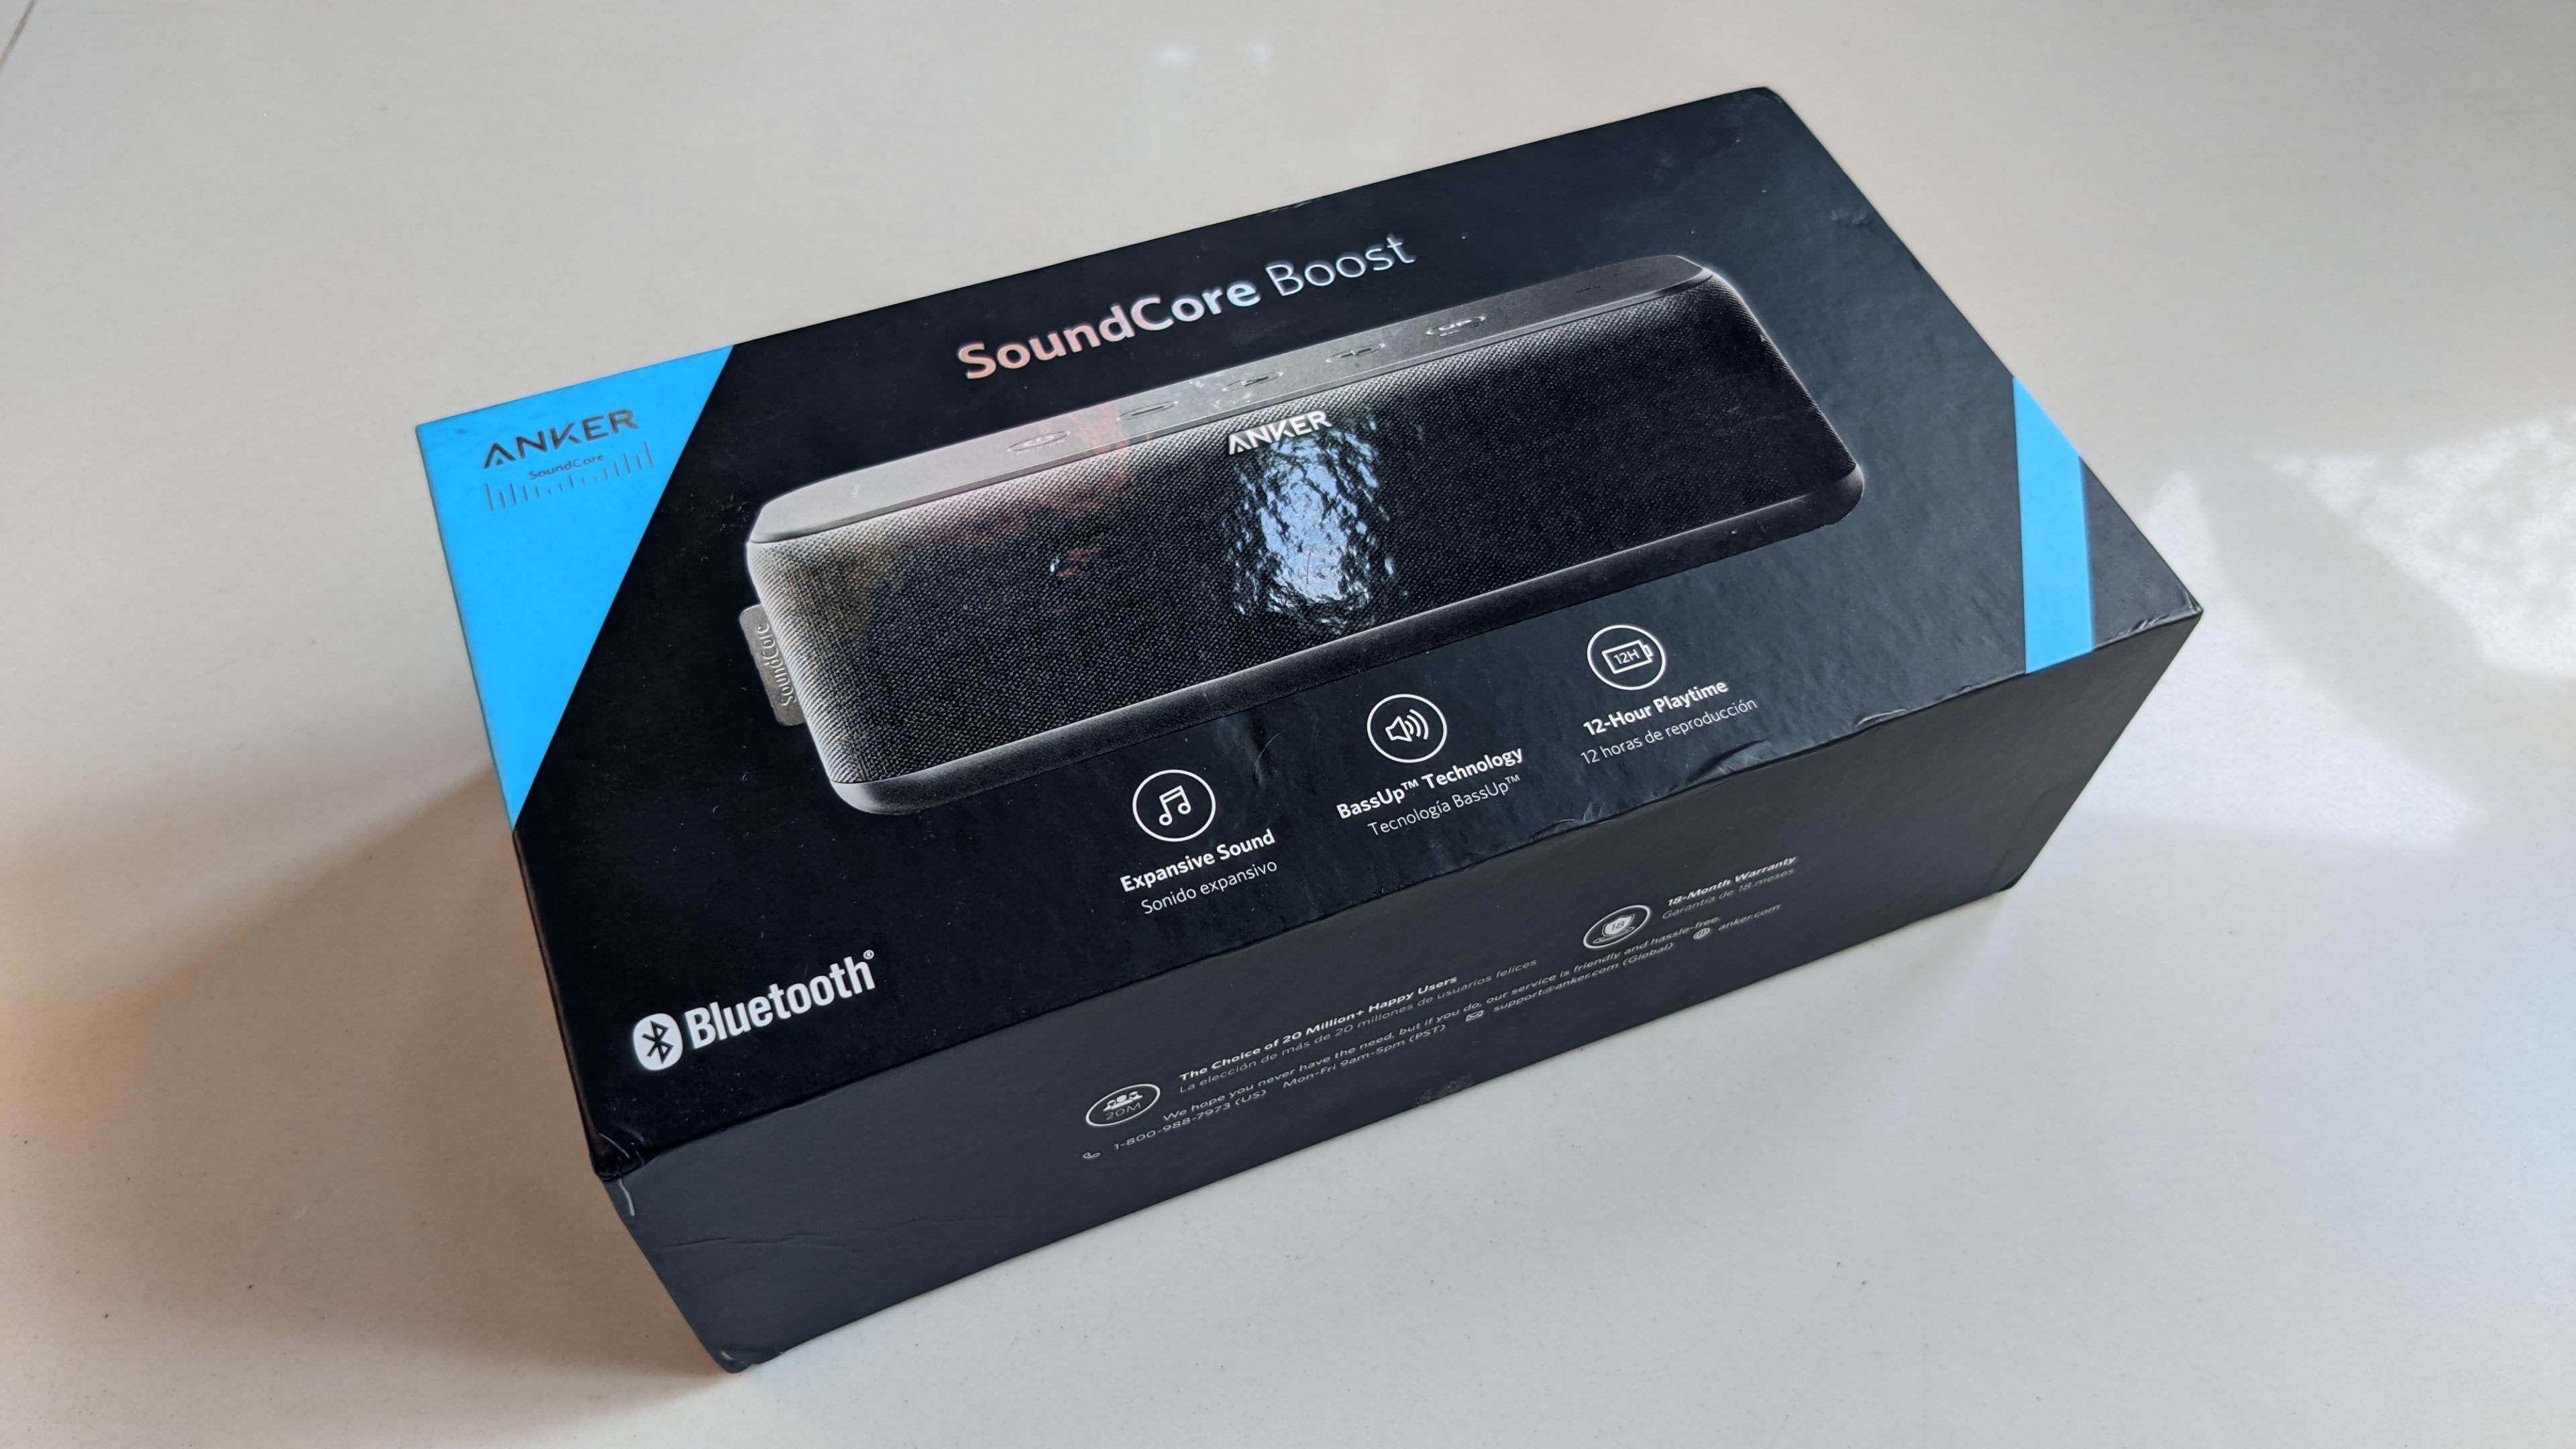 picture of anker soundcore boost speaker's packaging box